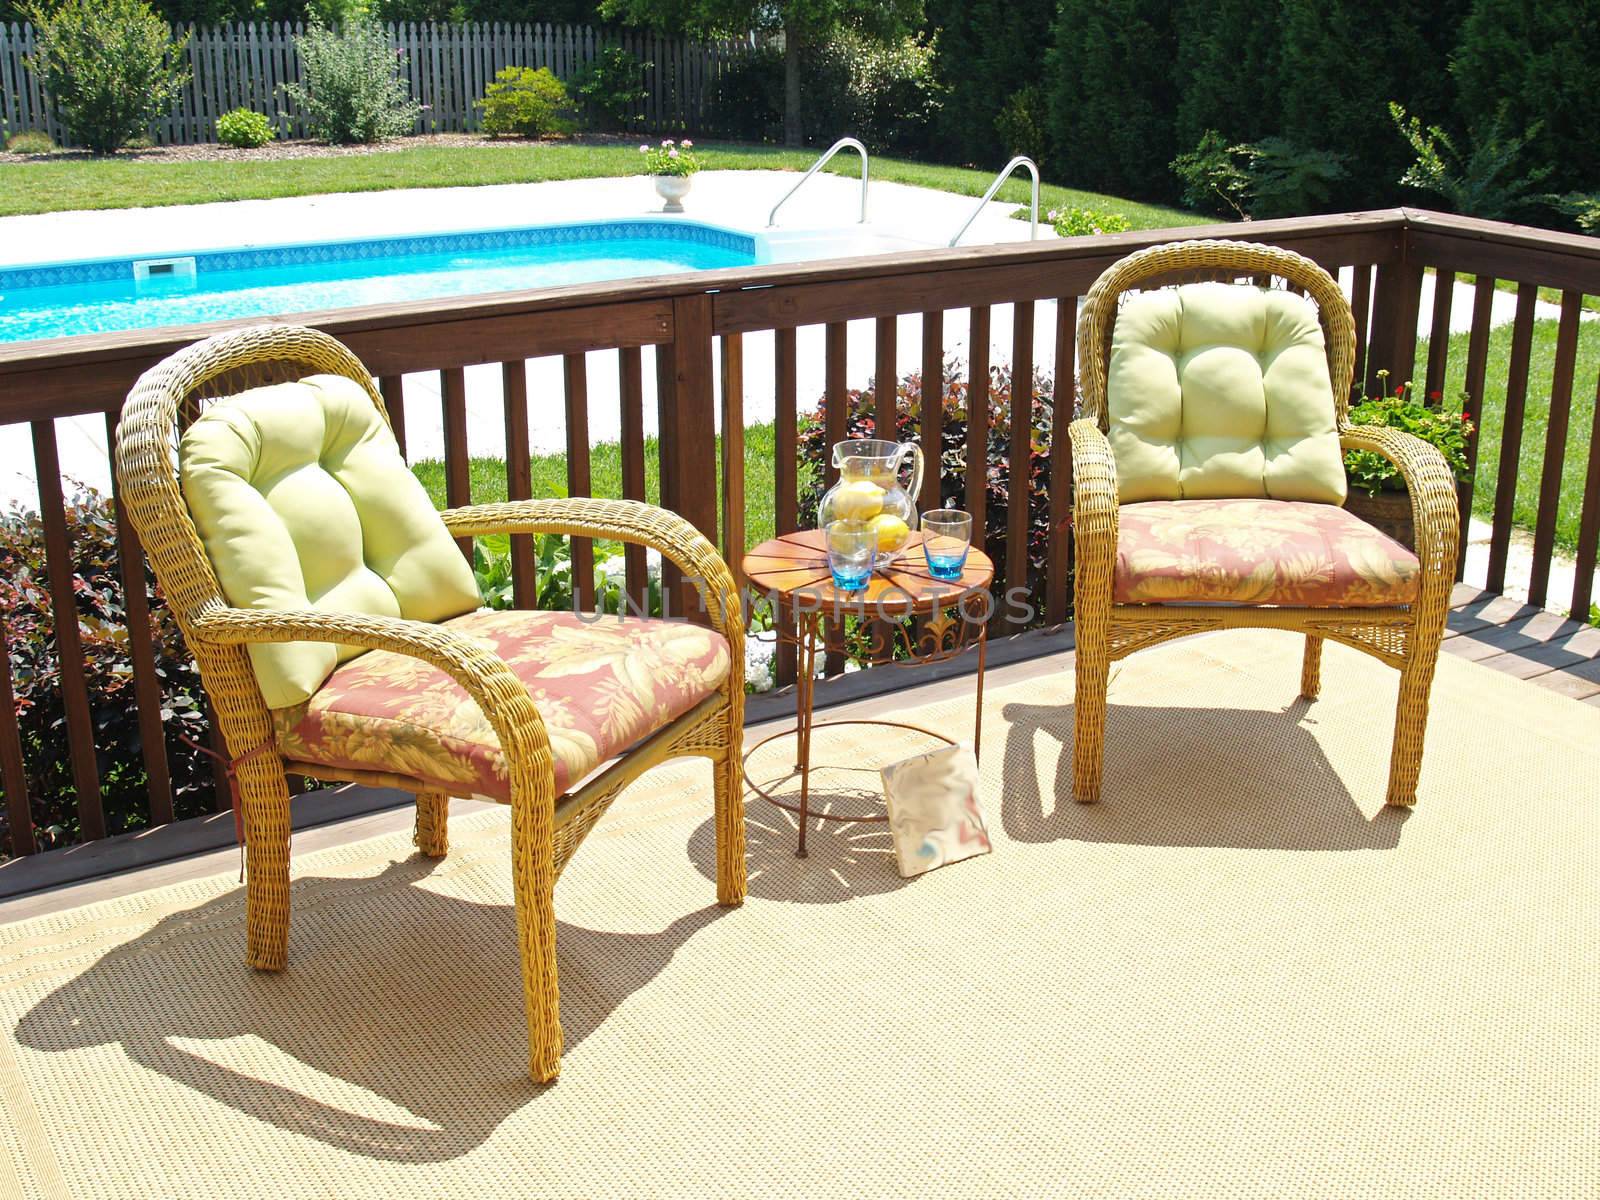 Two comfortable chairs on a patio overlooking a pool in the backyard